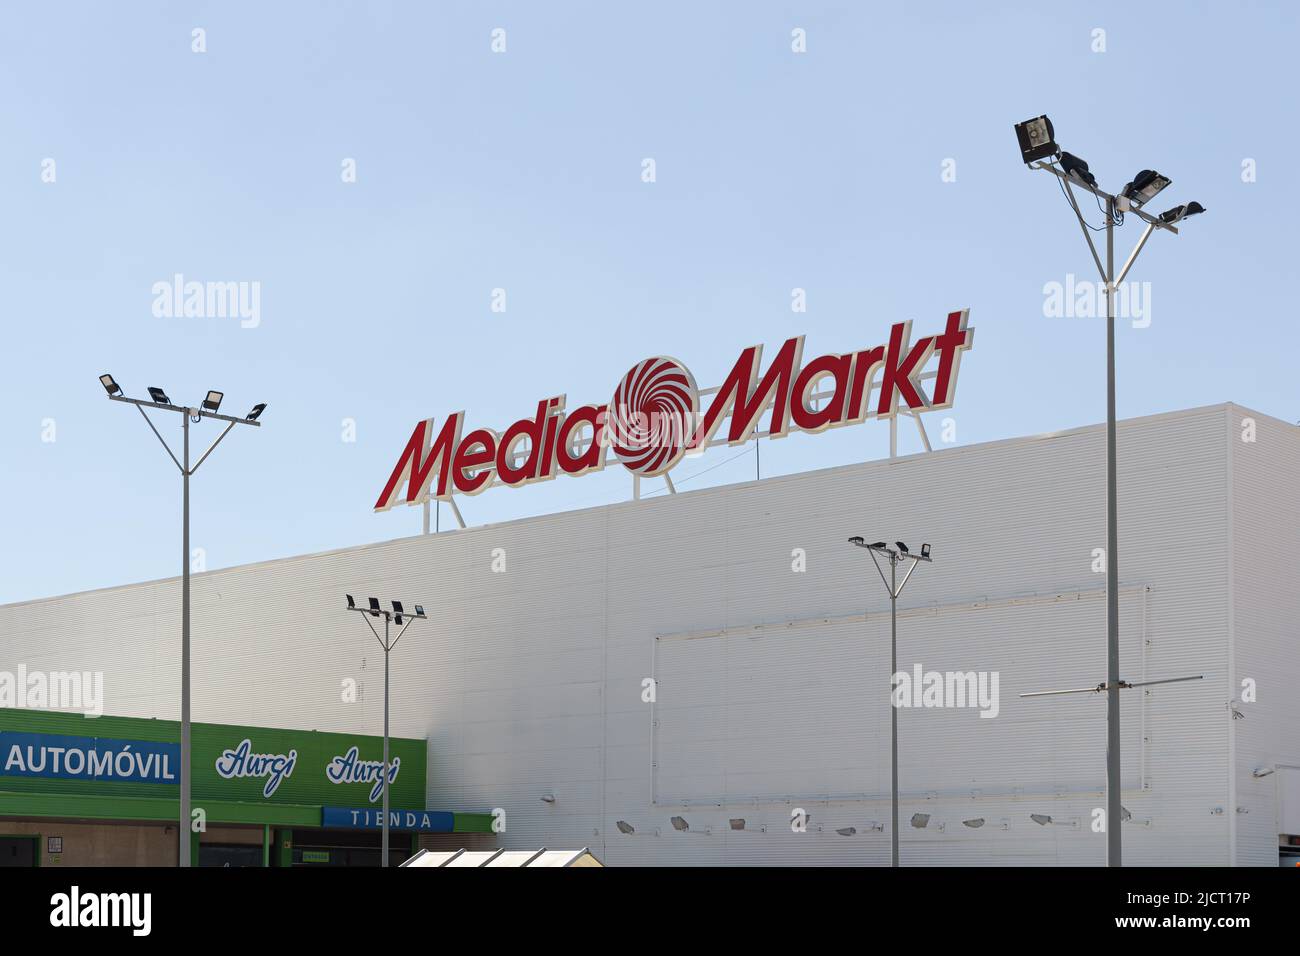 ALFAFAR, SPAIN - JUNE 06, 2022: Media Markt is a German multinational chain of stores selling consumer electronics Stock Photo